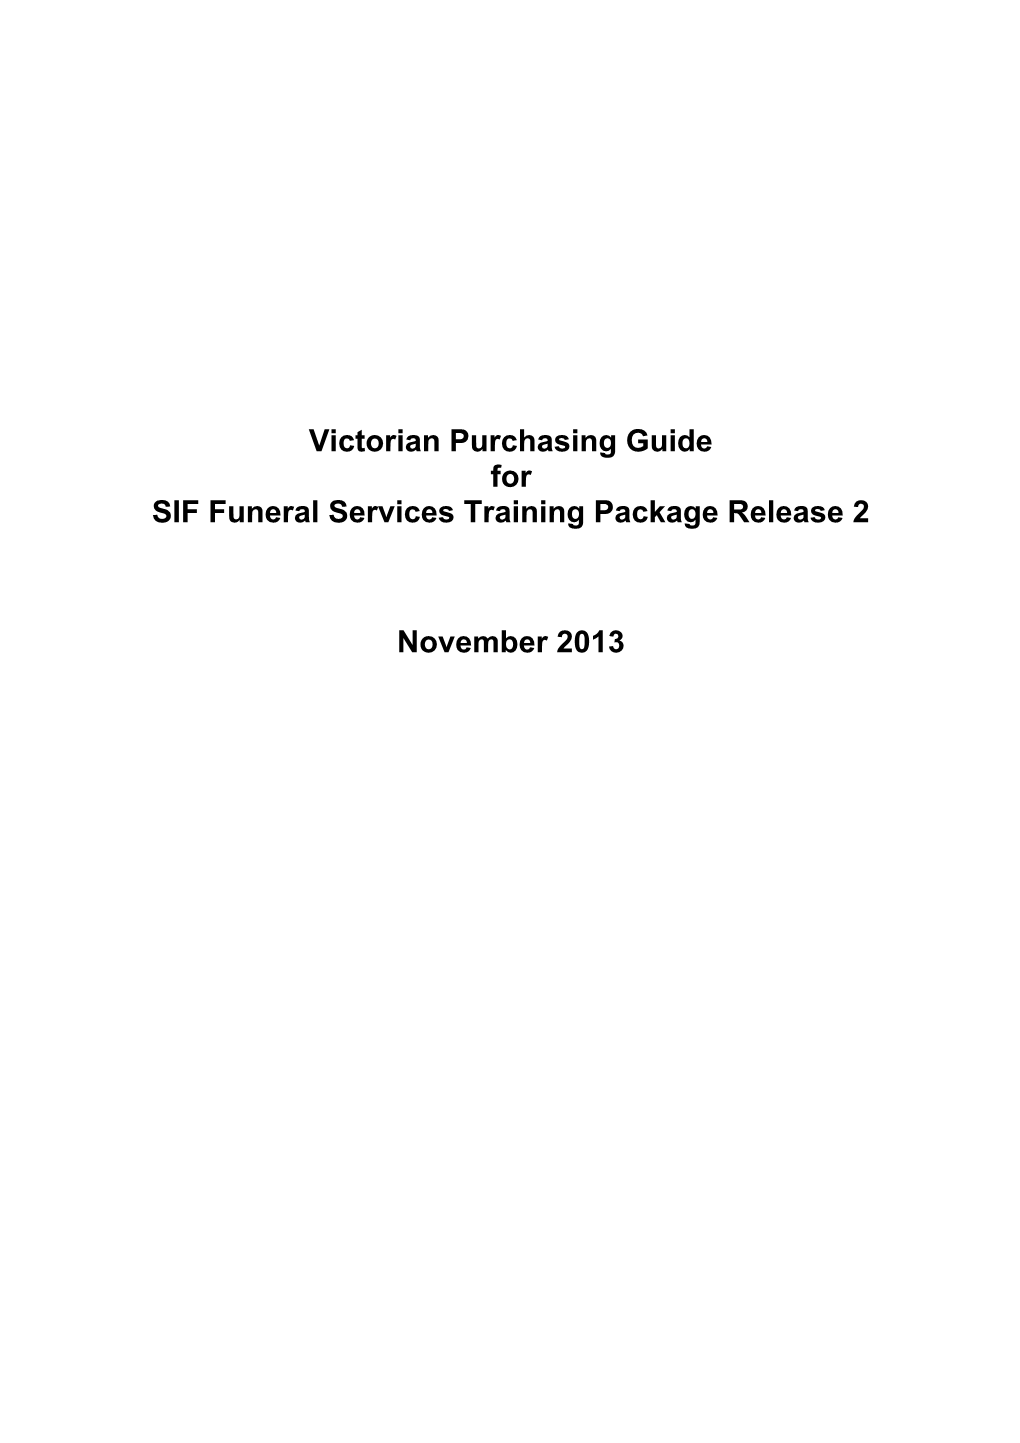 Victorian Purchasing Guide for SIF Funeral Services Version 2